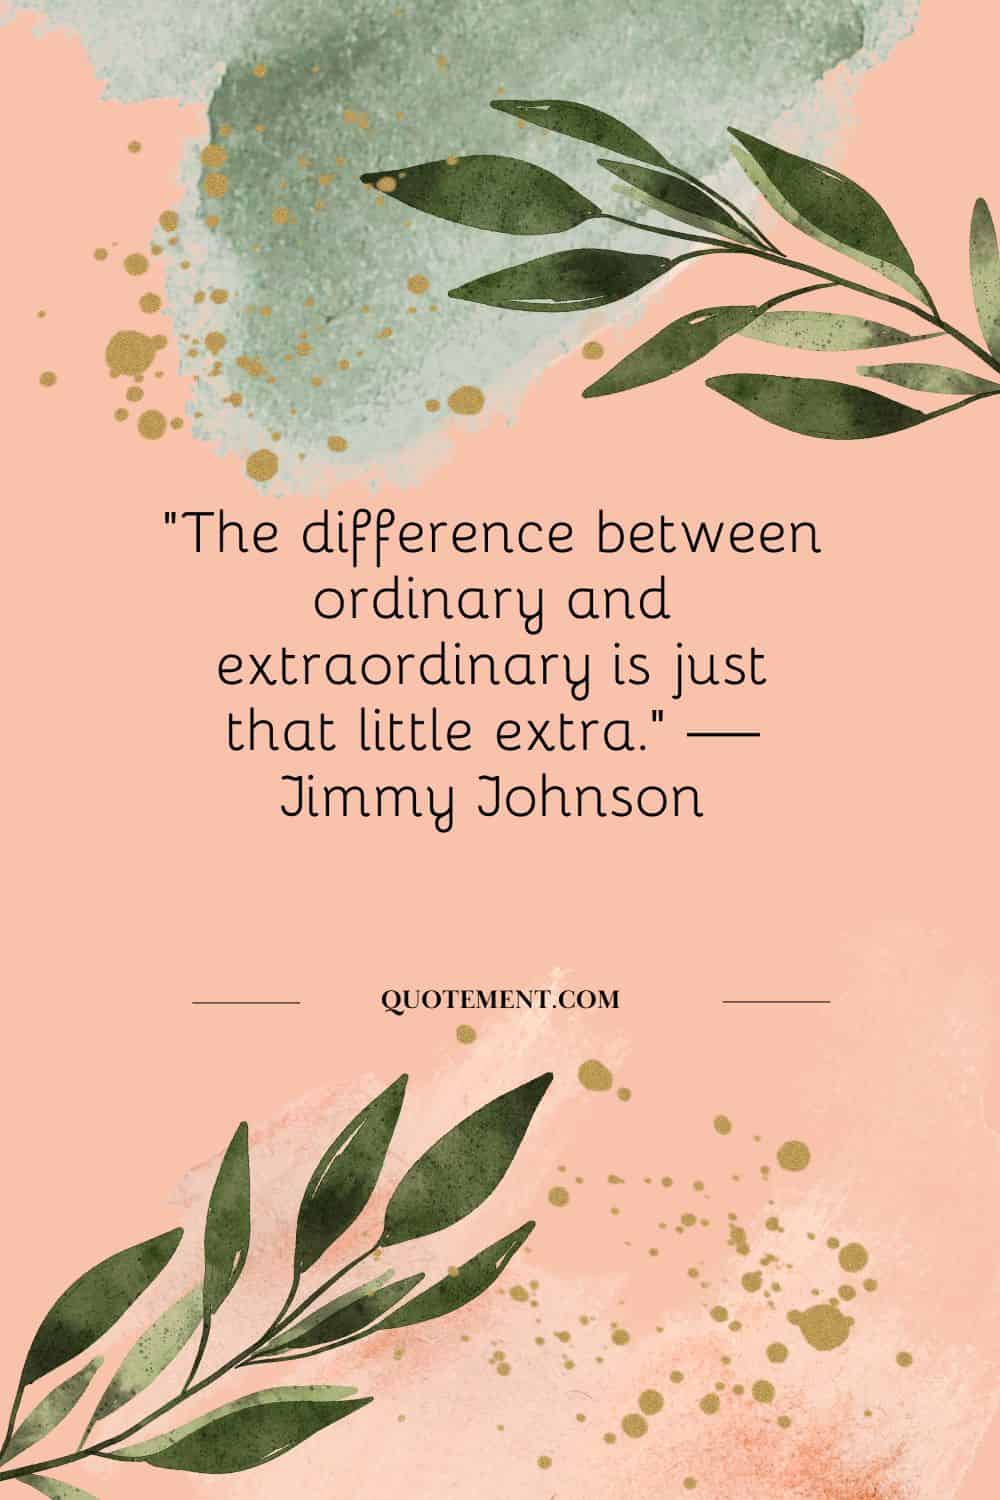 “The difference between ordinary and extraordinary is just that little extra.” — Jimmy Johnson